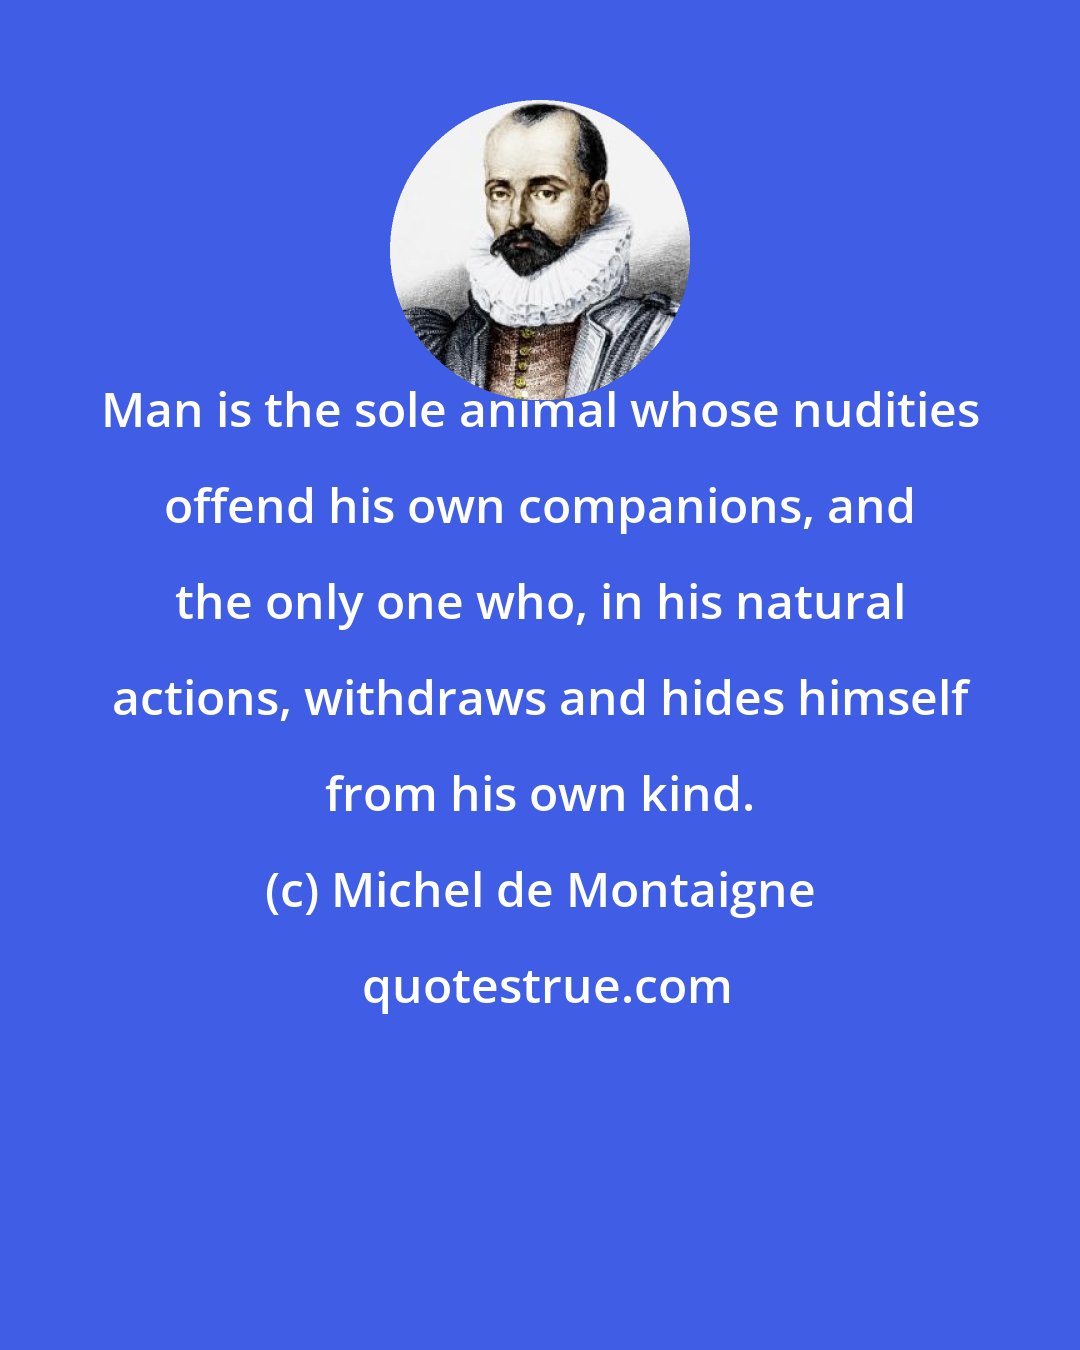 Michel de Montaigne: Man is the sole animal whose nudities offend his own companions, and the only one who, in his natural actions, withdraws and hides himself from his own kind.